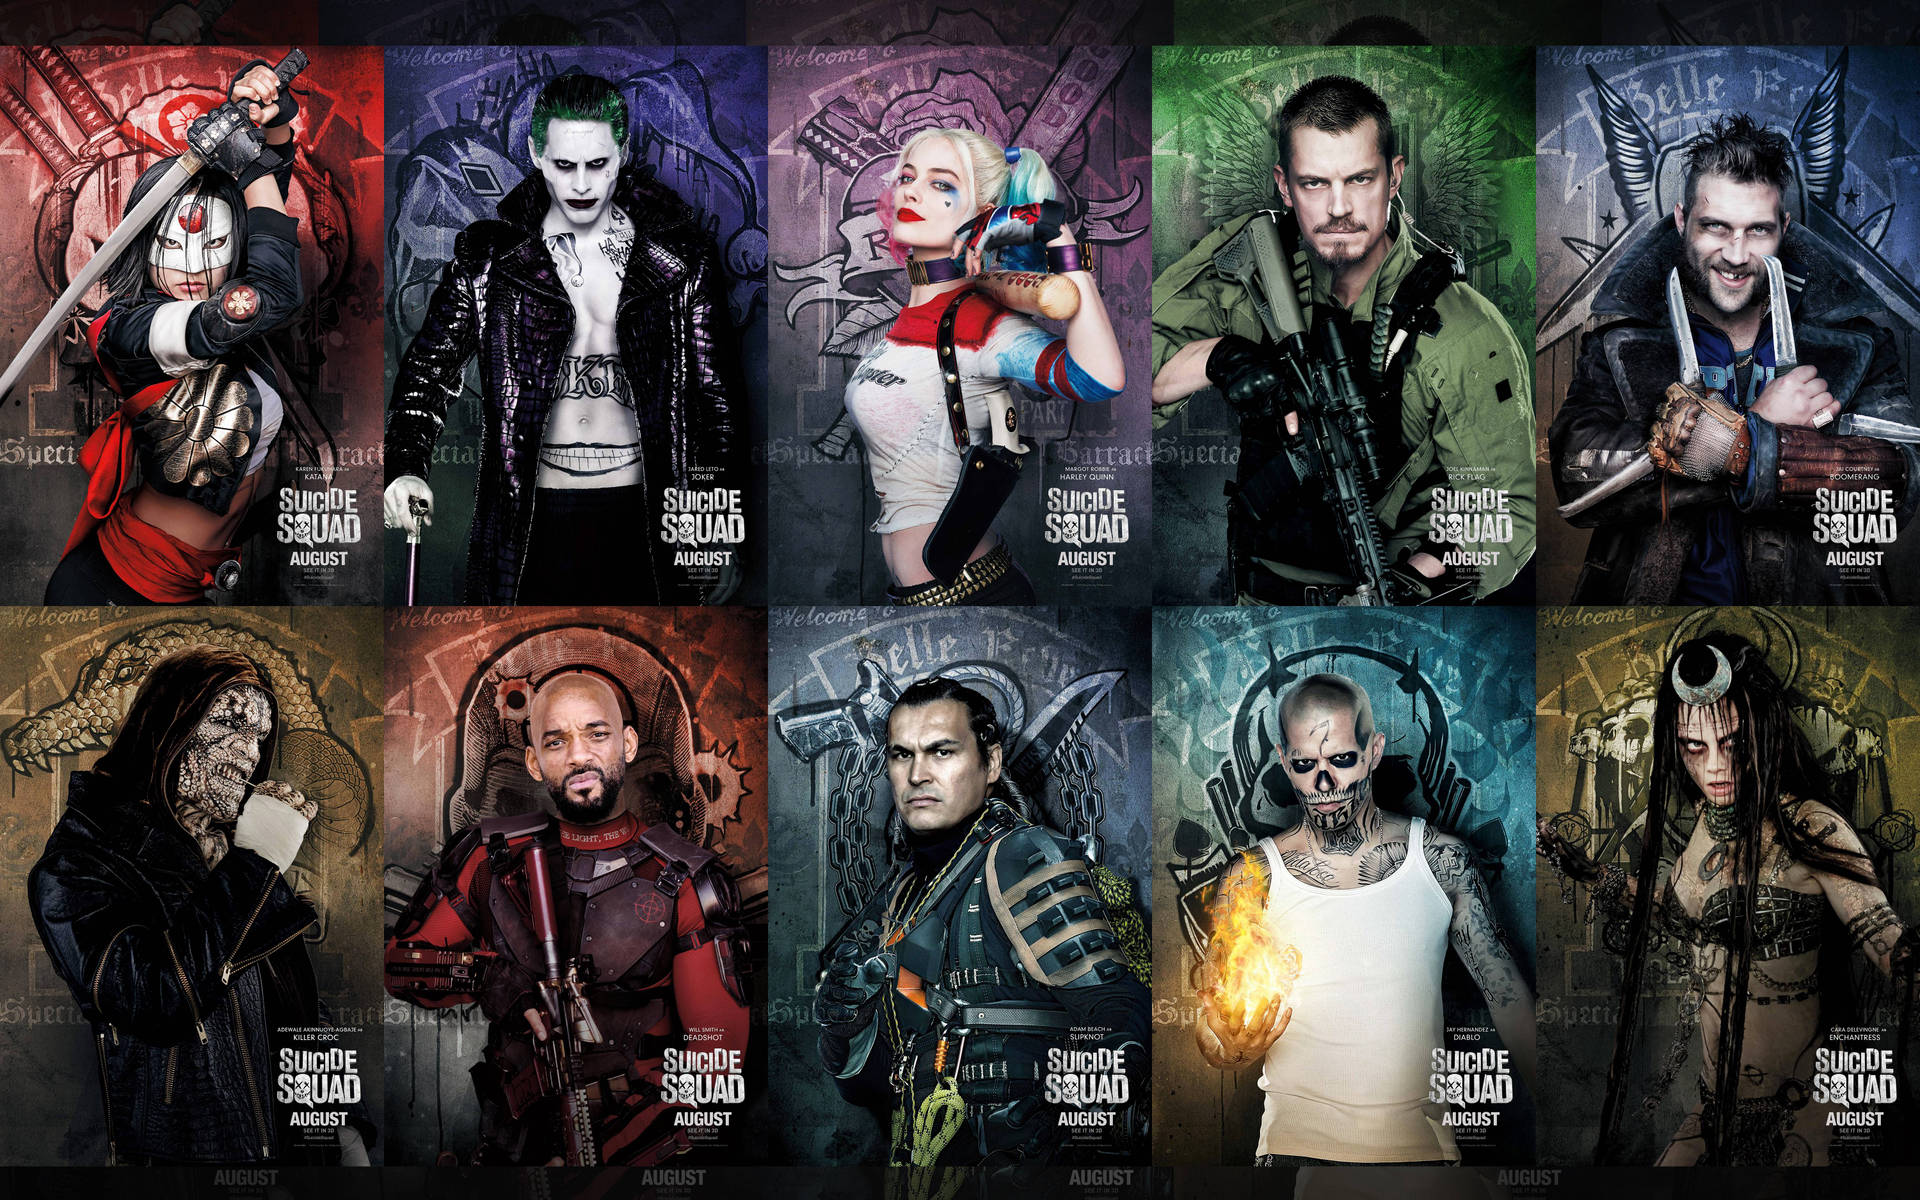 Official Suicide Squad Movie Poster Featuring The Team And Their Superpower Weapons Background